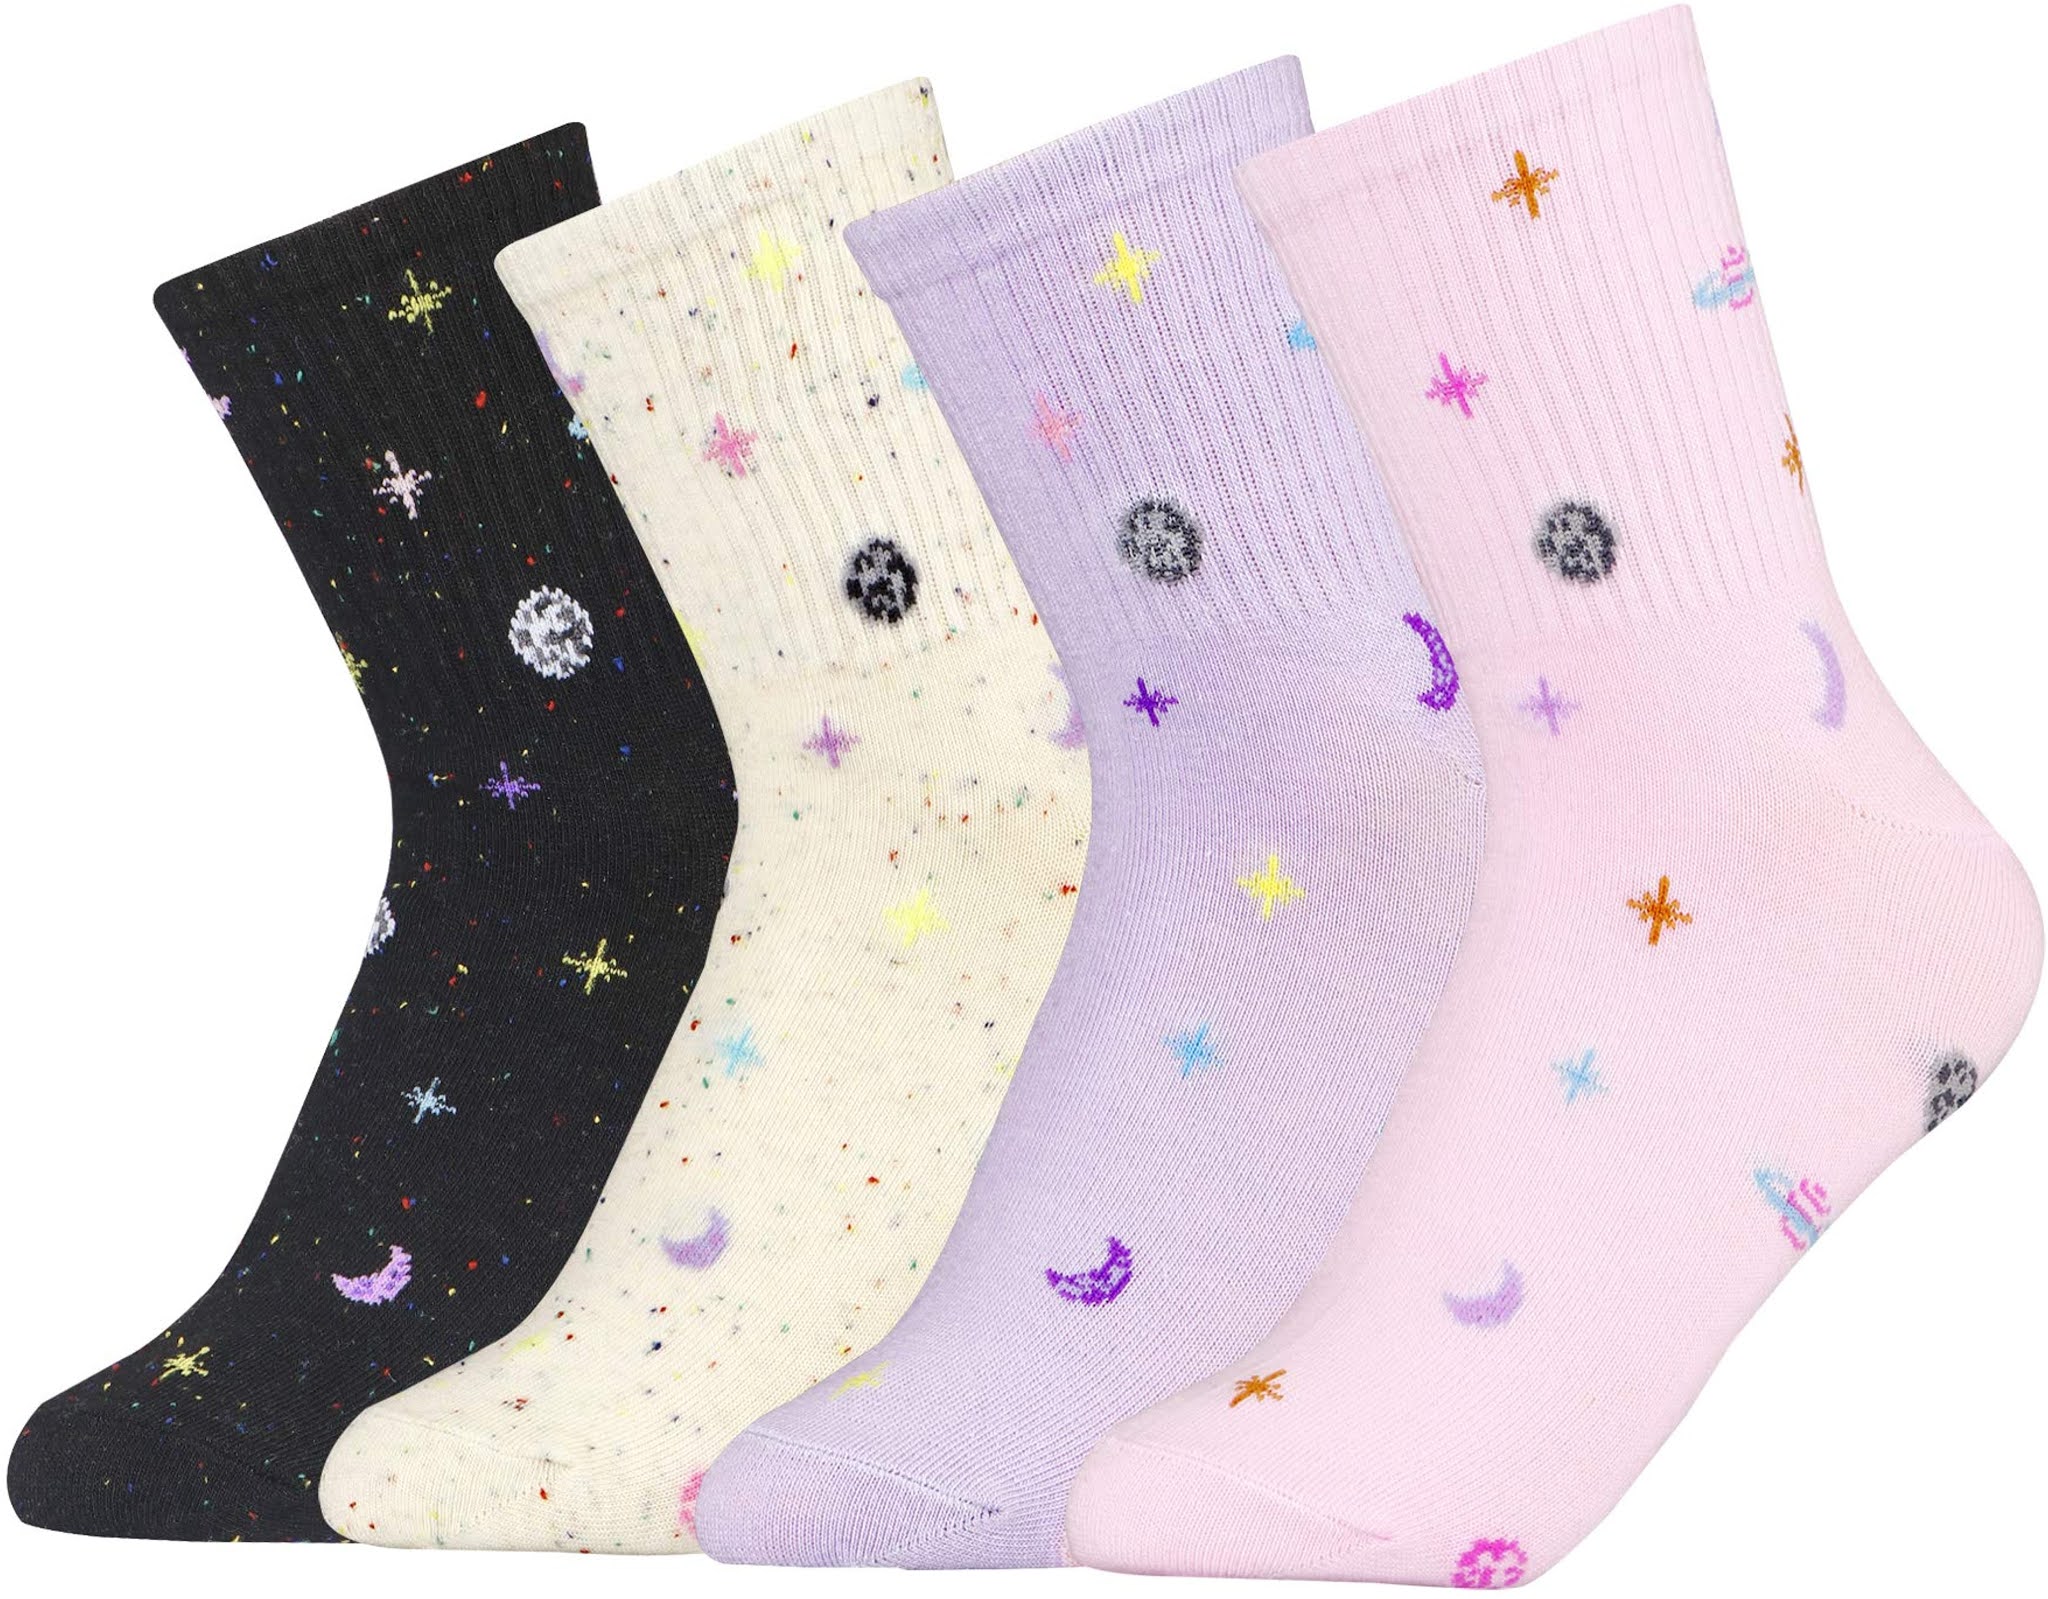 Women's Aesthetic Novelty Casual Cute Colorful Patterned Cotton Crew Dress Socks